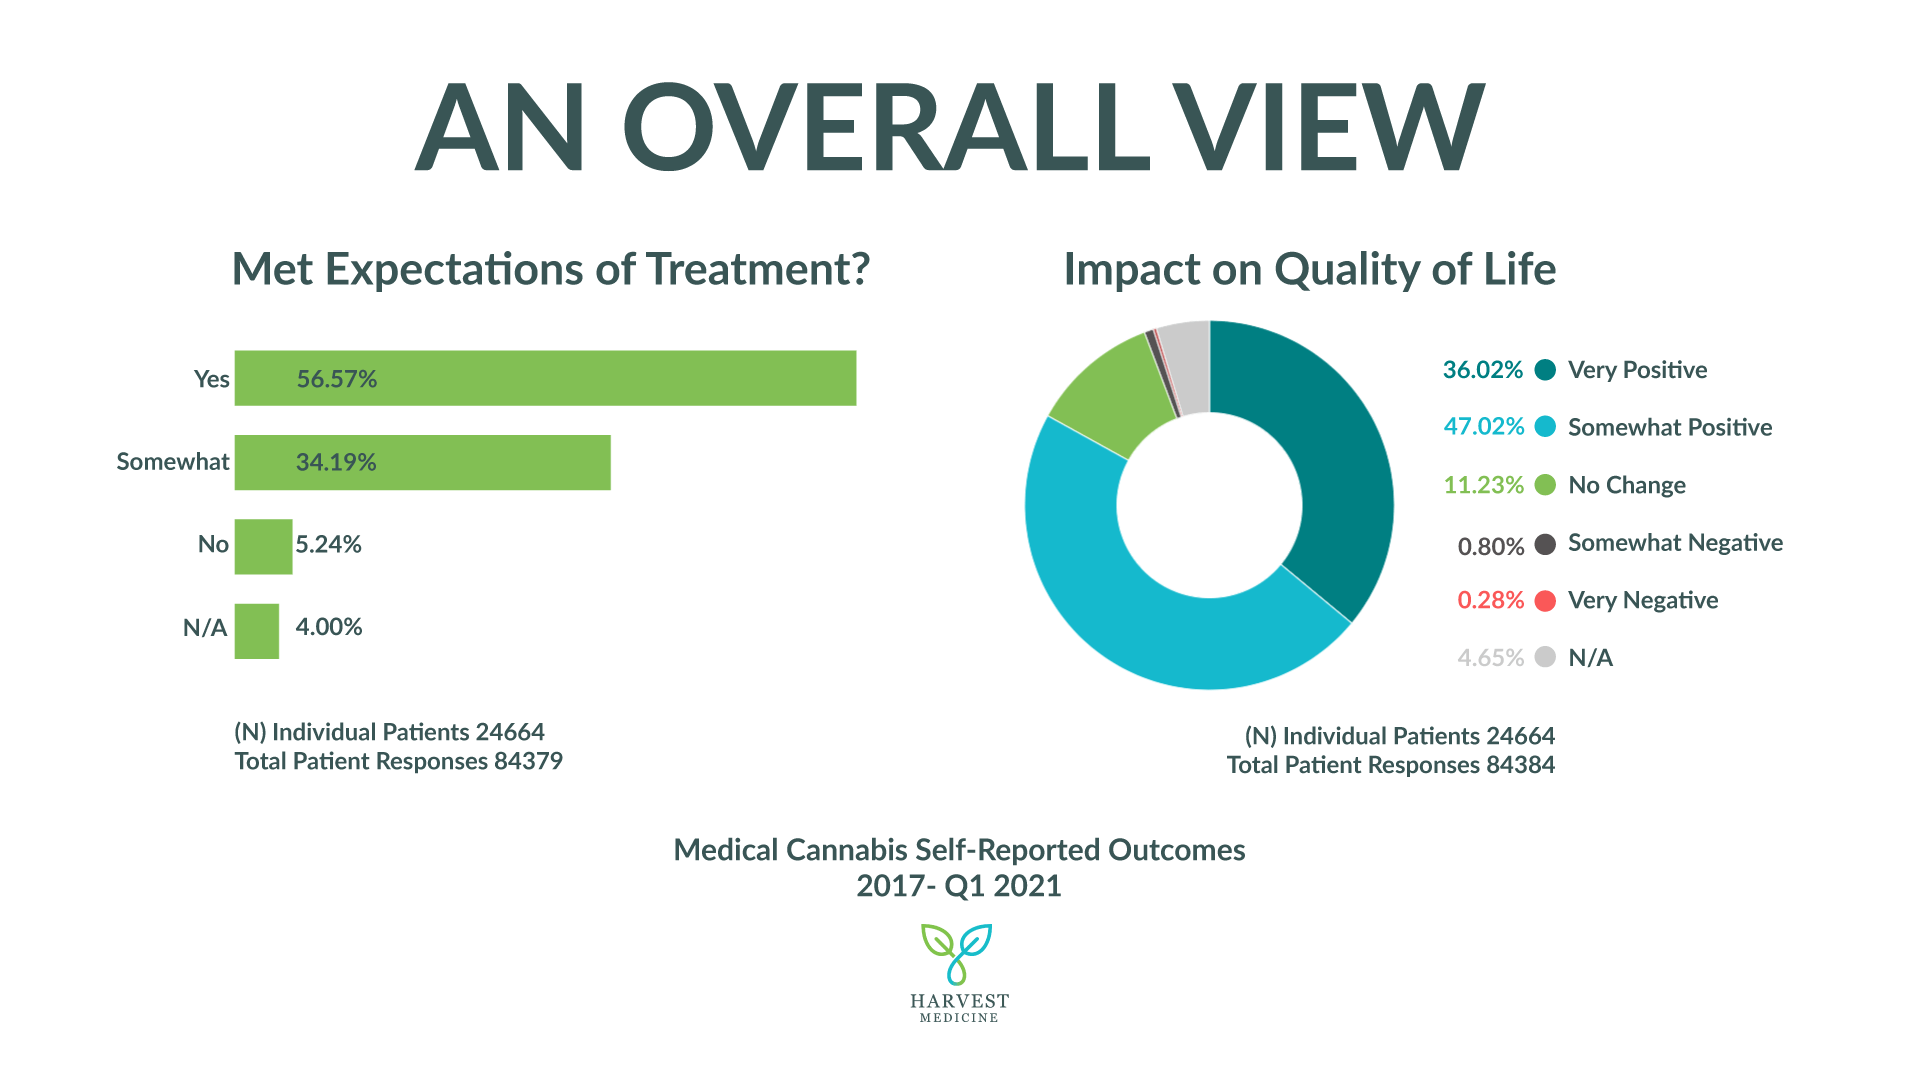 An overall view of patient self-reported outcomes at Harvest Medicine 2017-2021